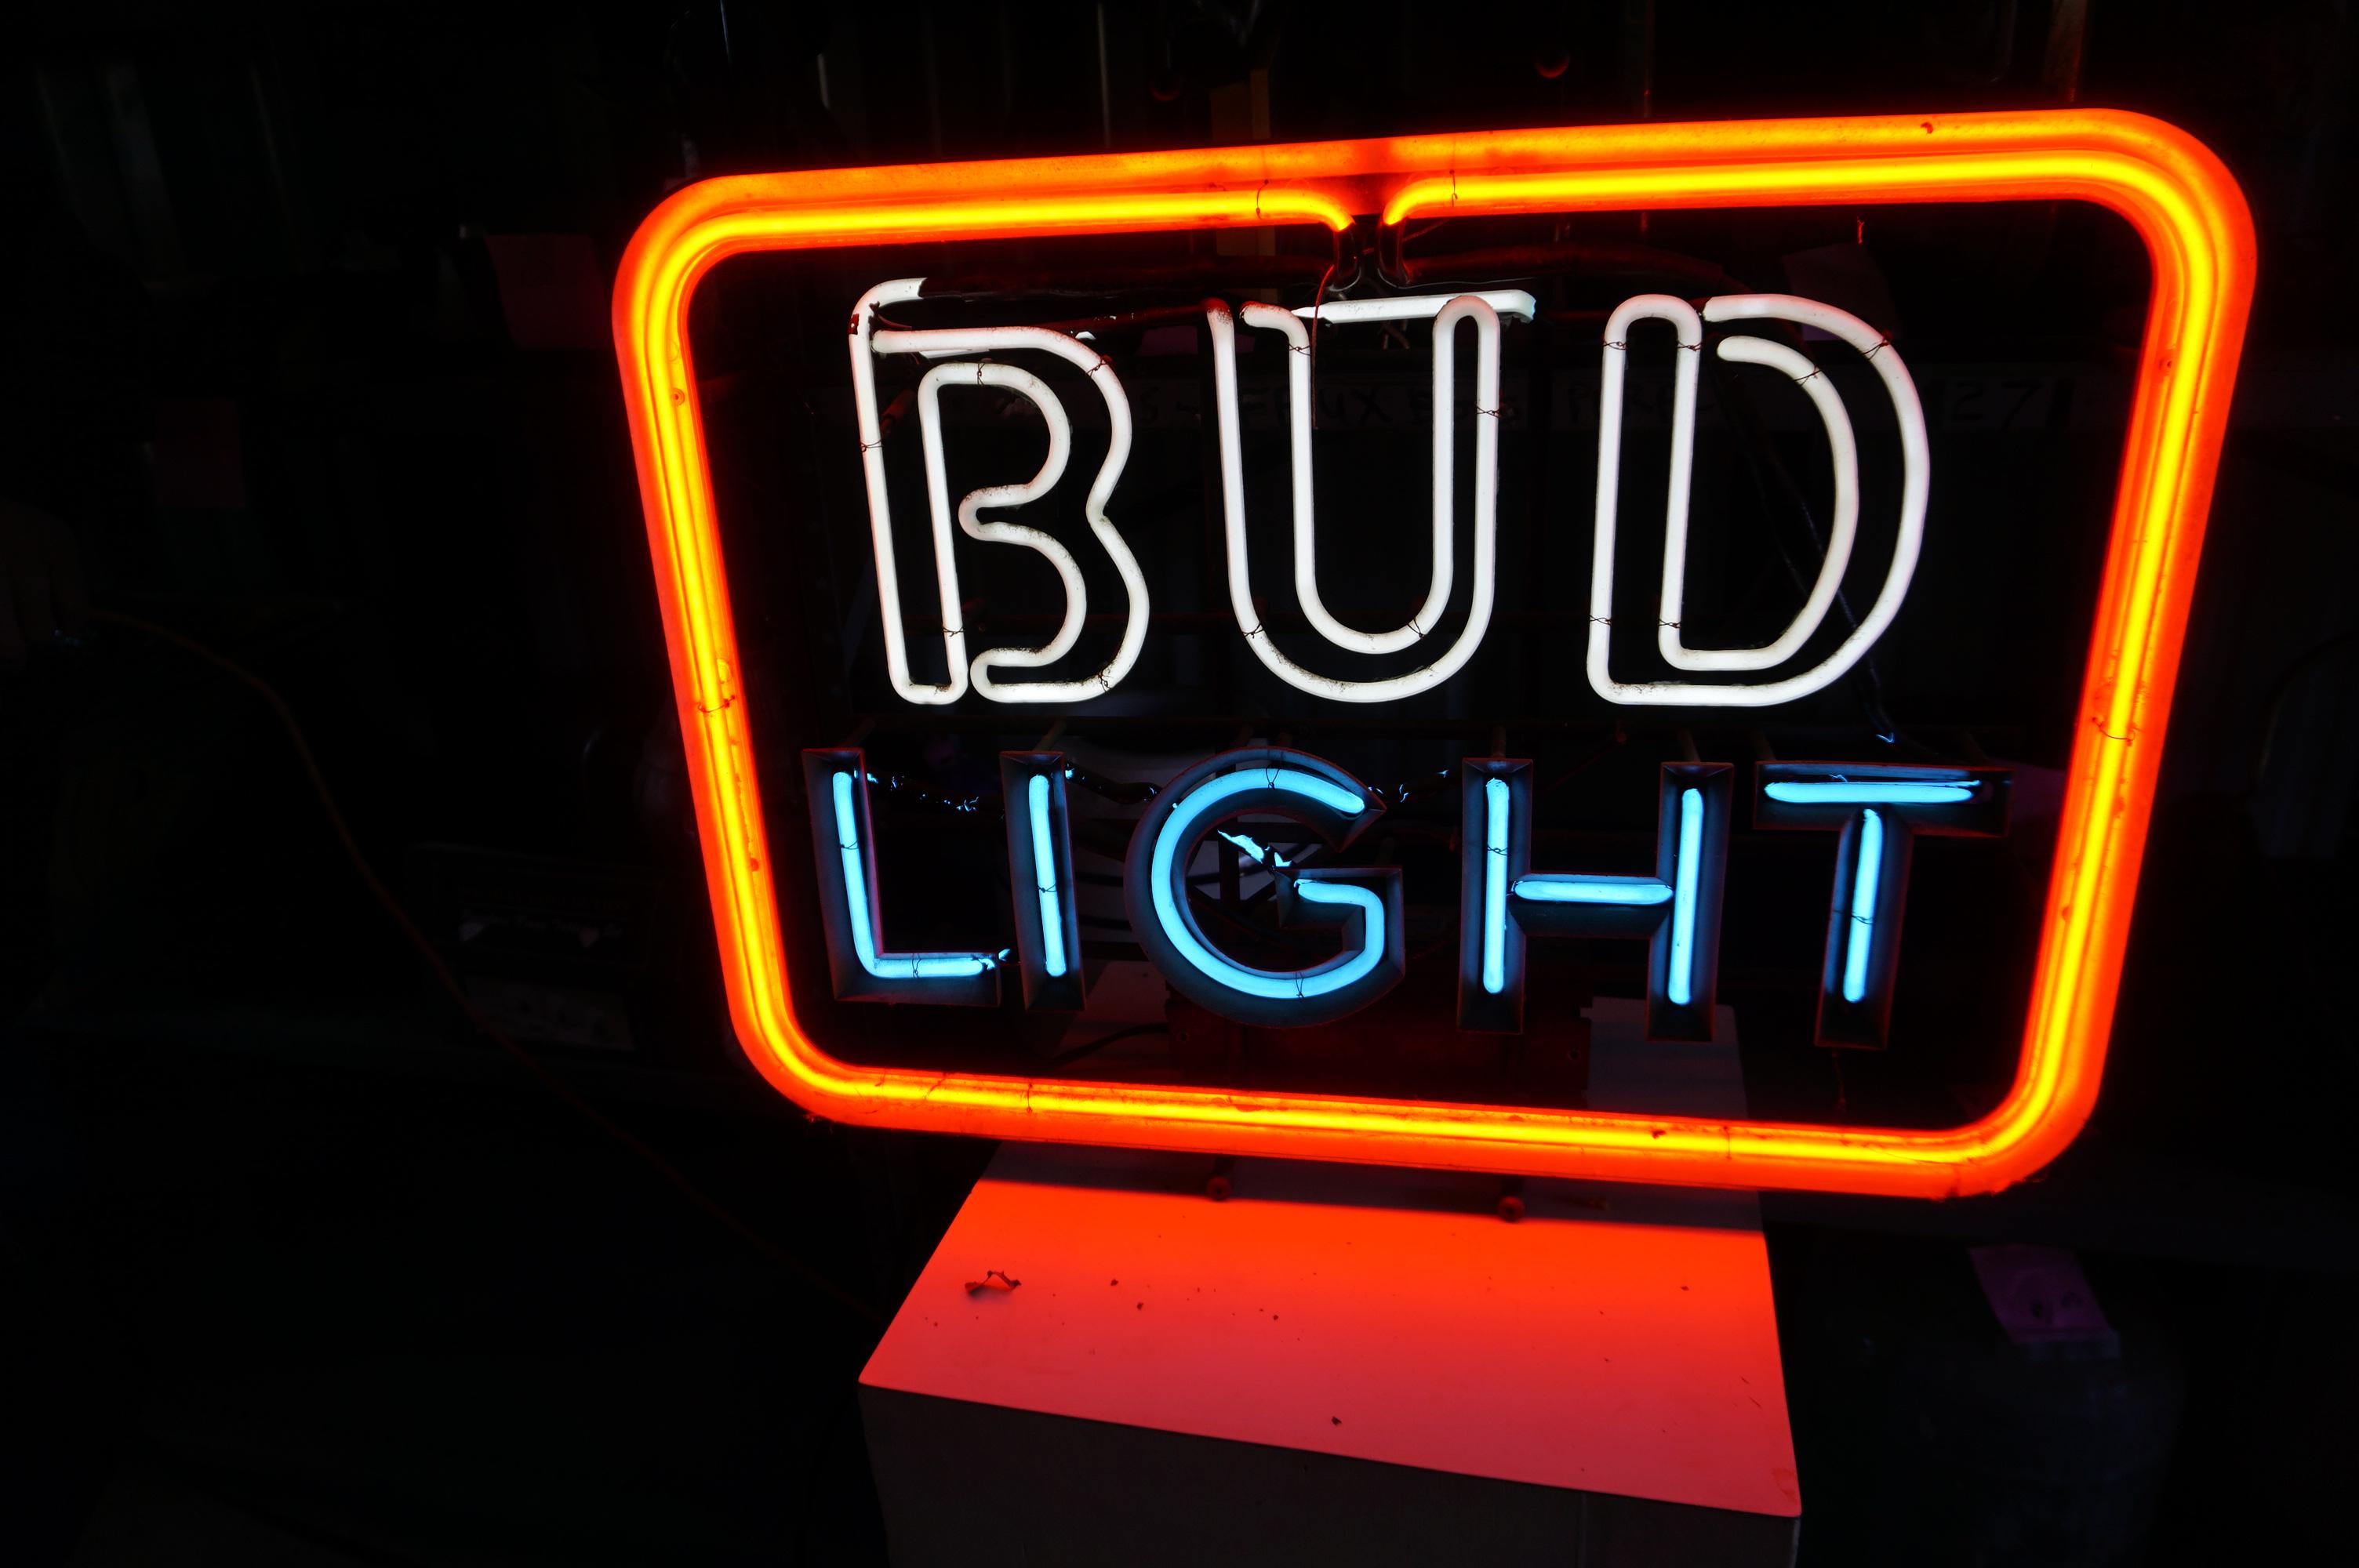 Bud Light Working Neon Sign, Older Model, Dirty from storage, NO SHIPPING! PICK-UP ONLY!